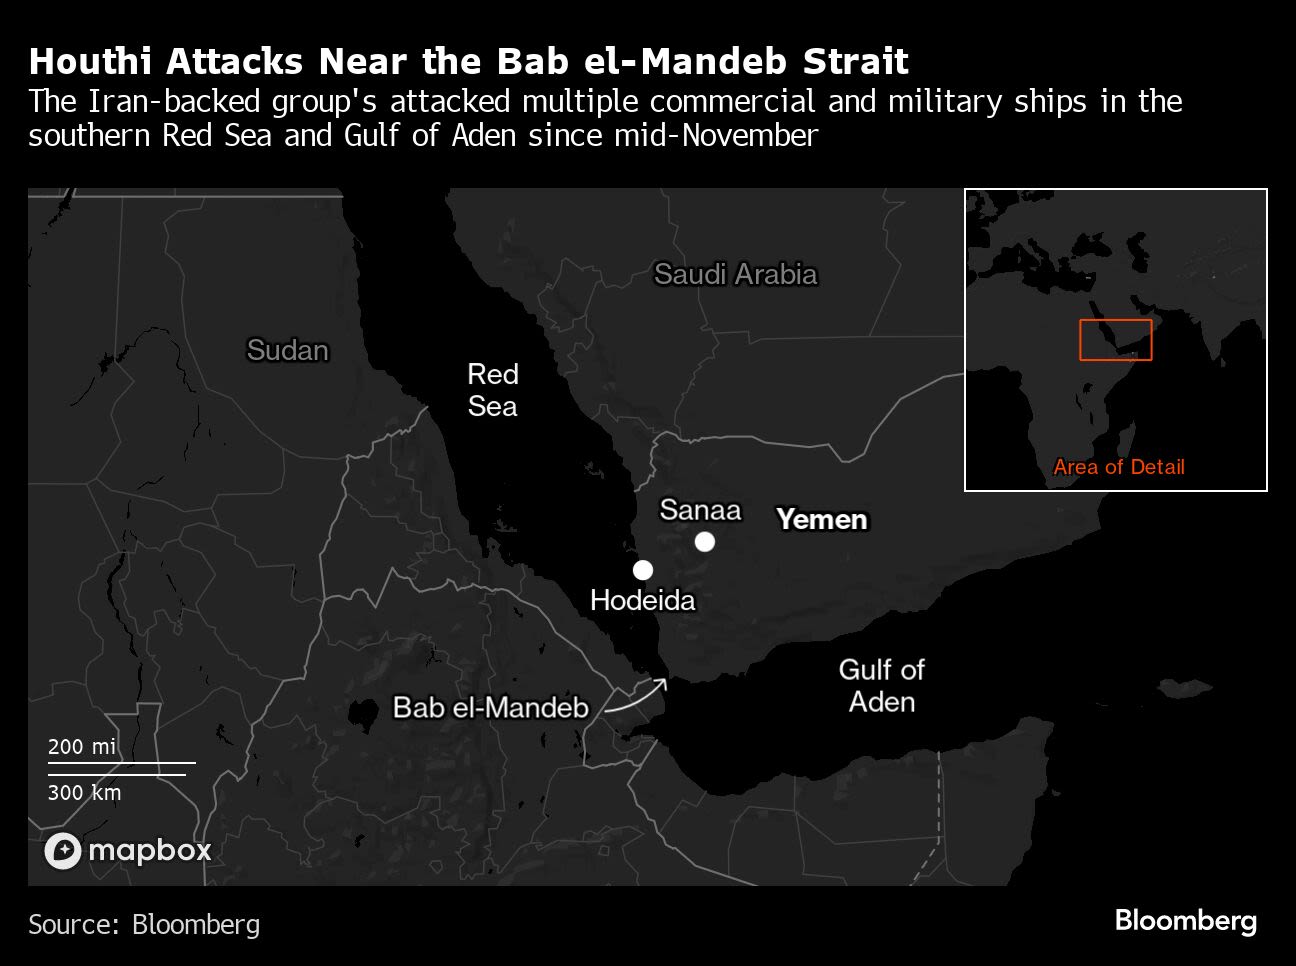 Houthis Say They Attacked Warship After Deadly US-UK Strikes